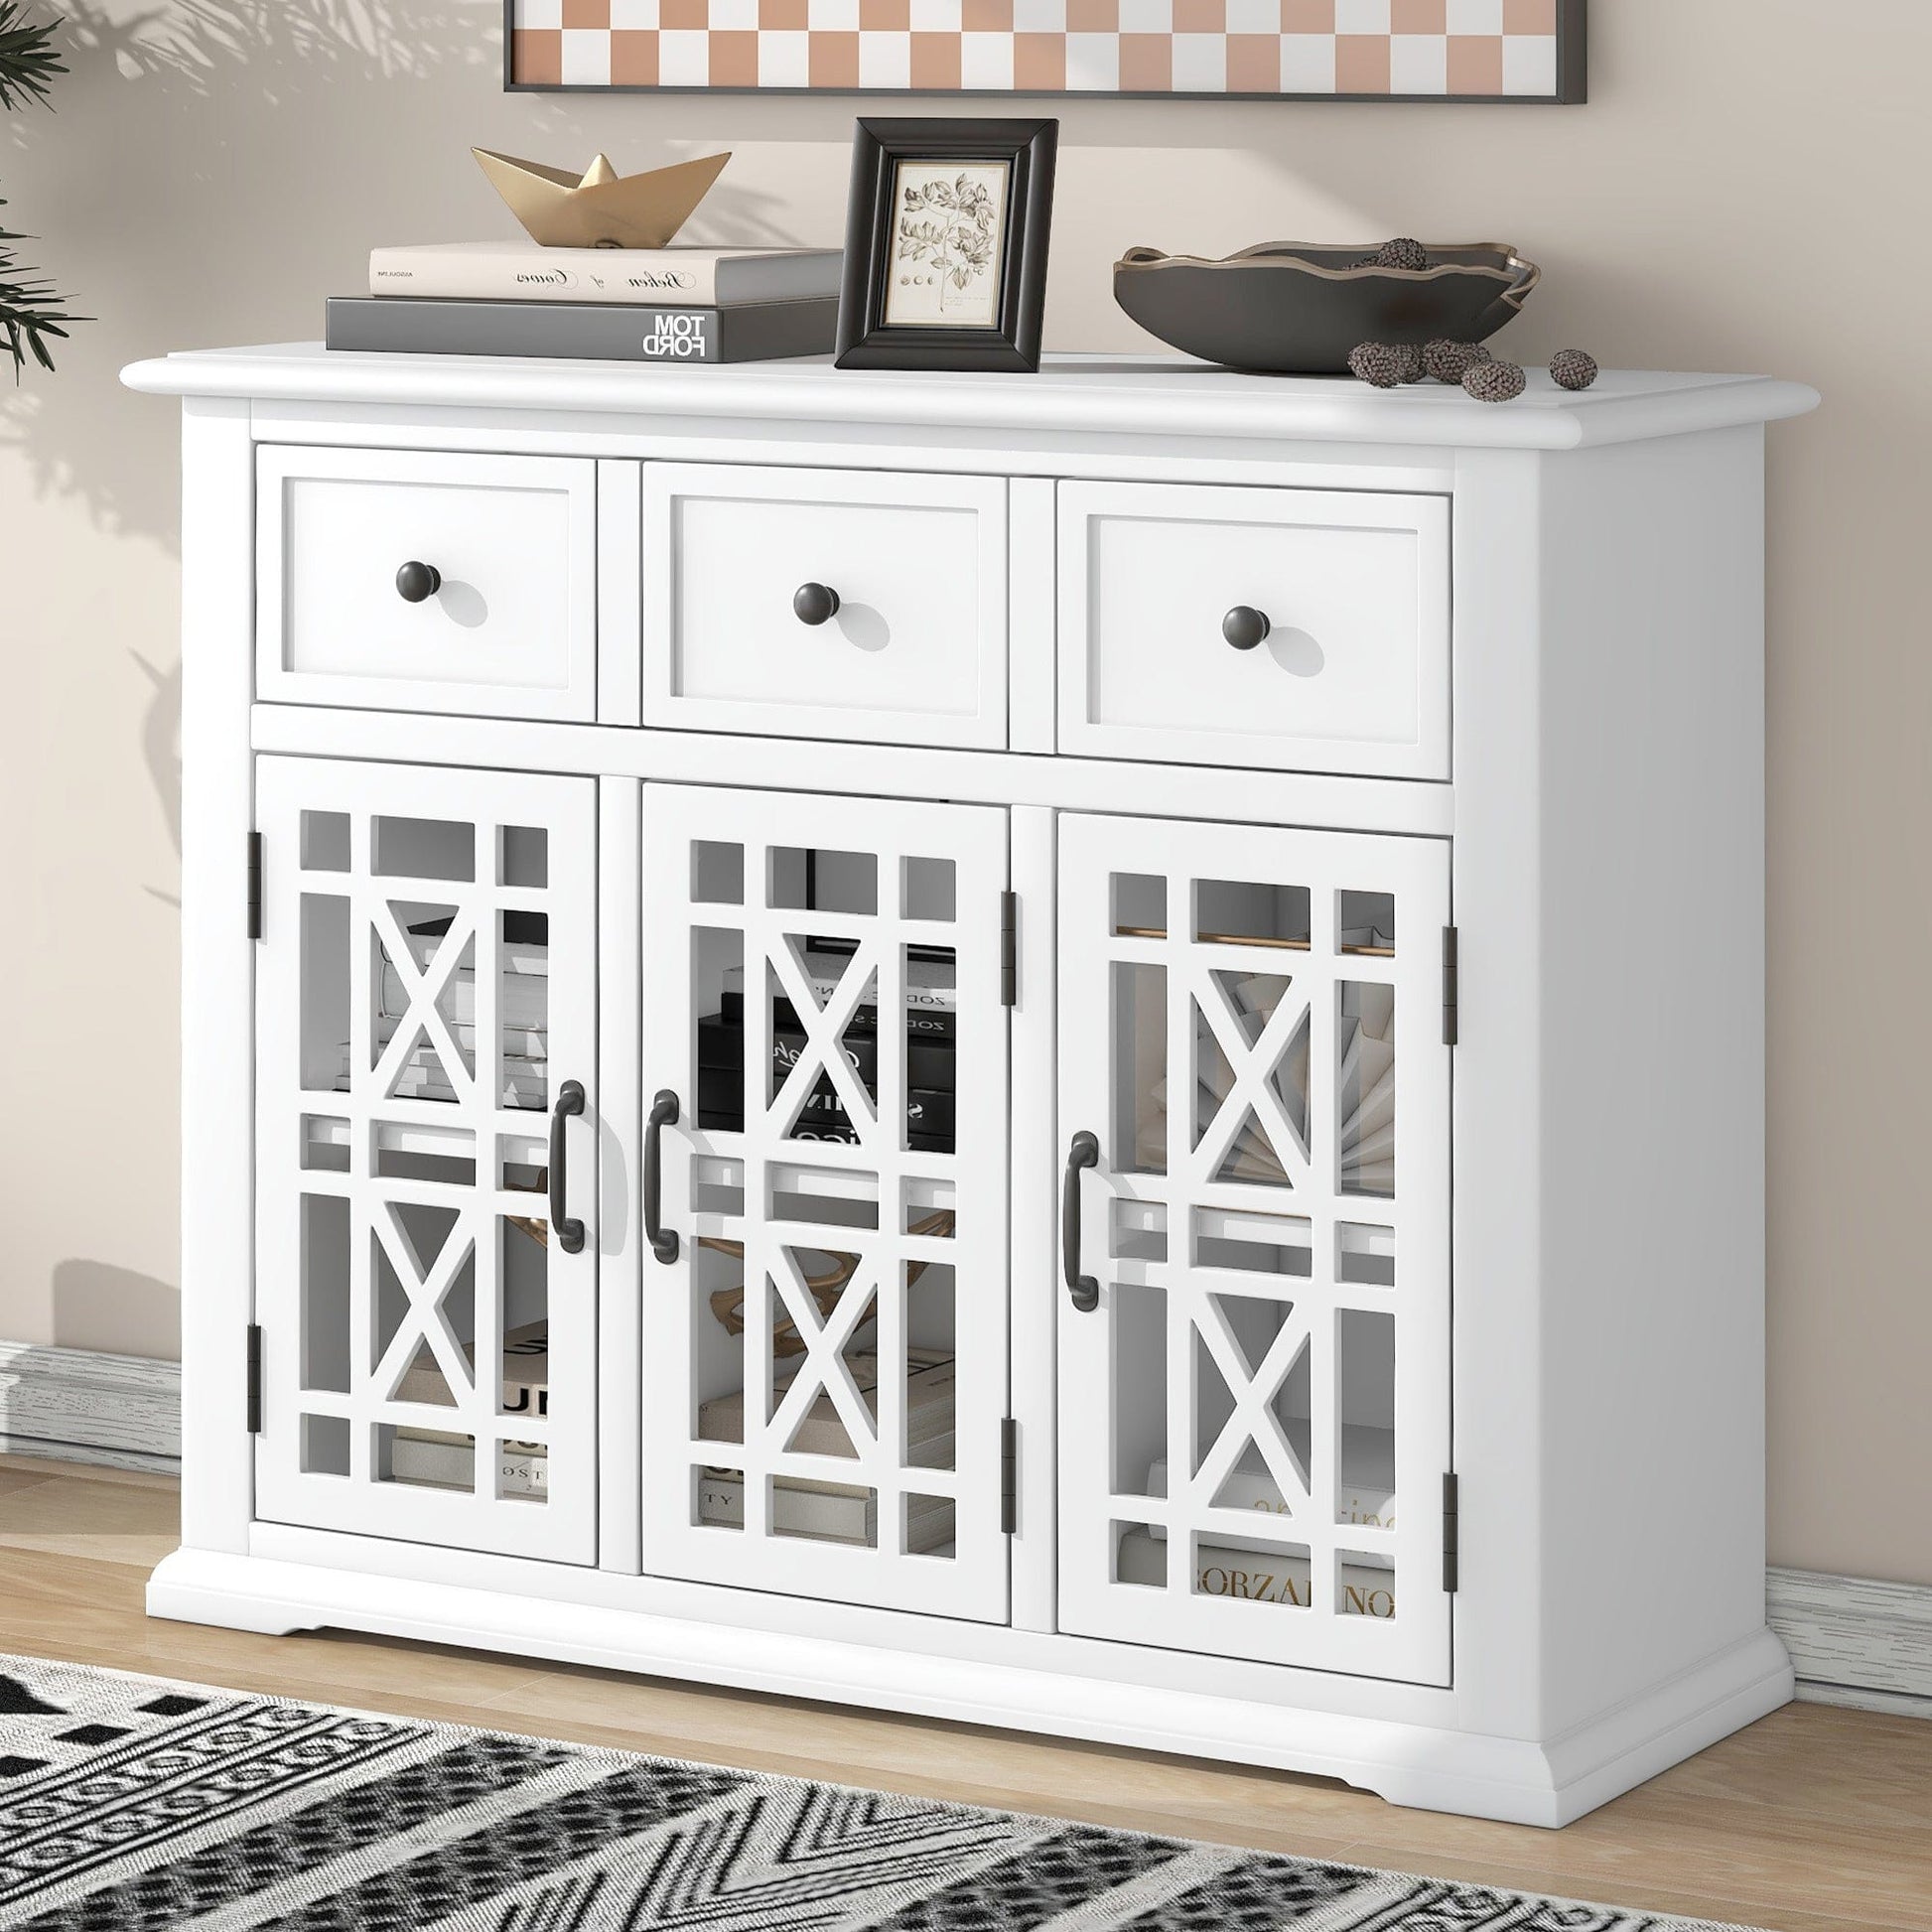 1st Choice Furniture Direct Cabinet 1st Choice U-Style Wood Storage Cabinet with 3 Doors and 3 Drawers